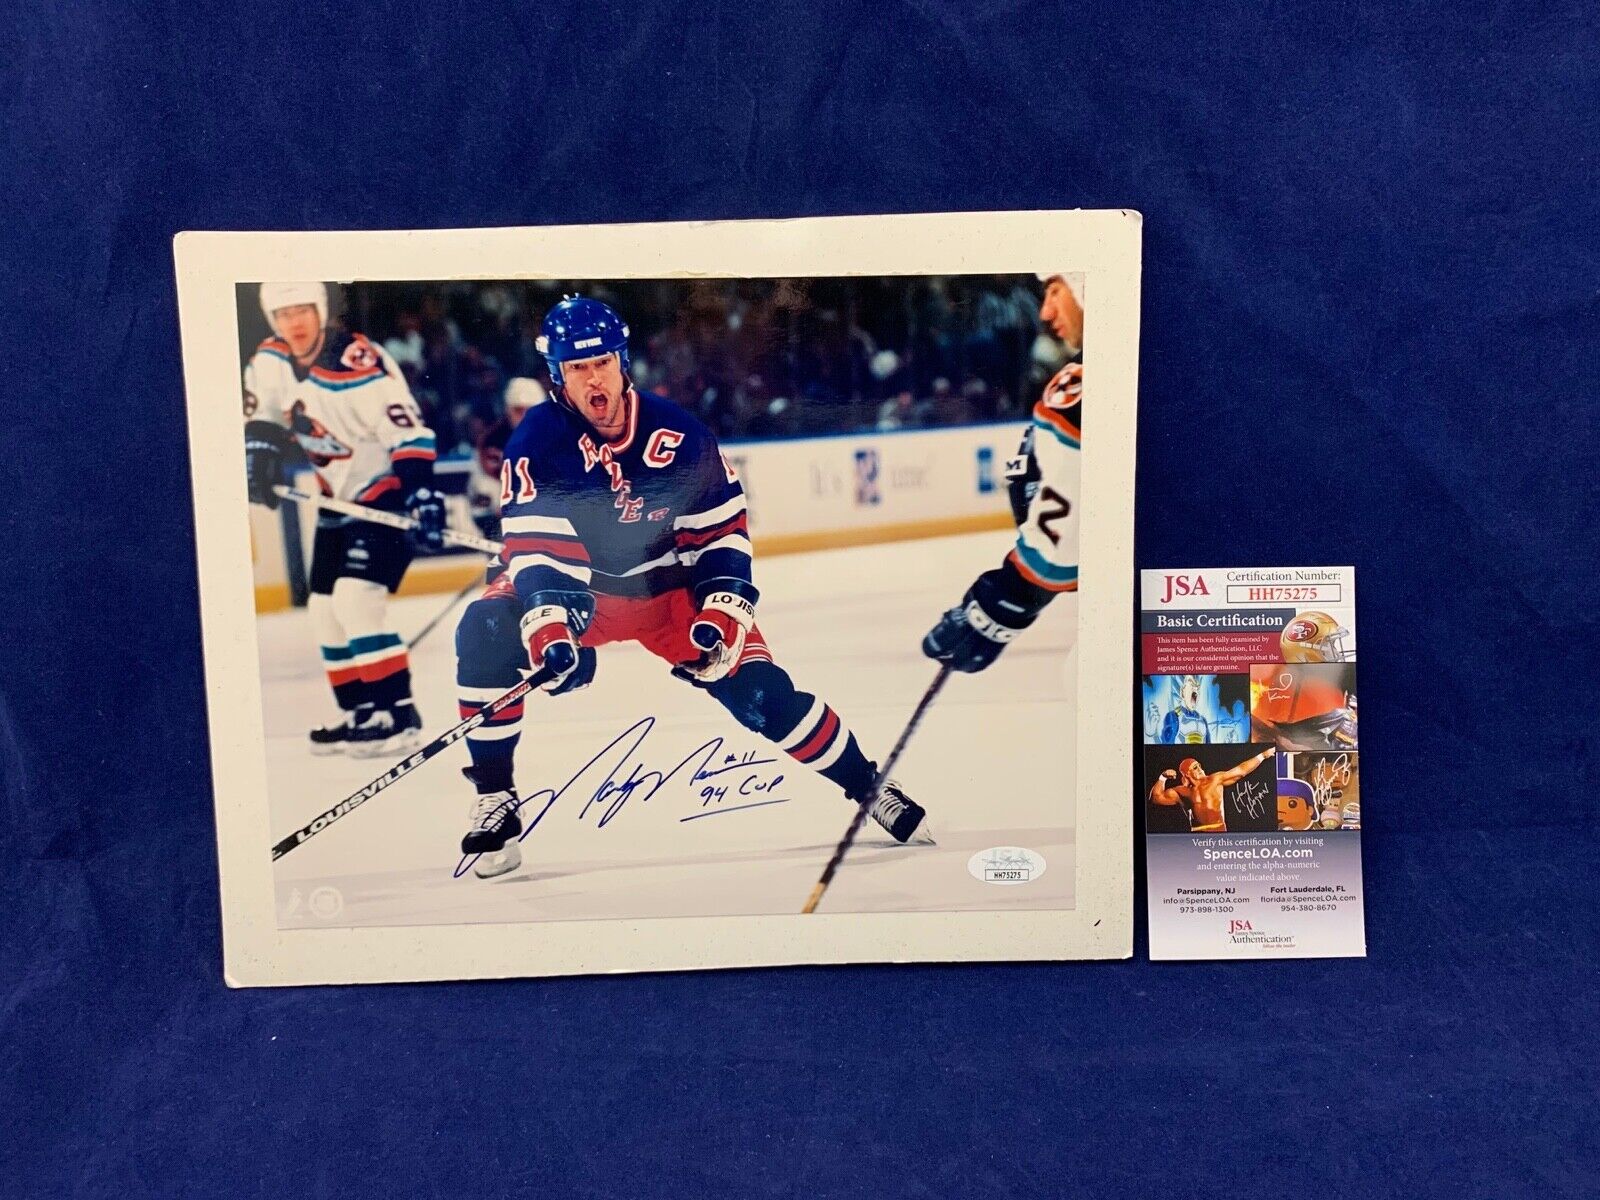 Mark Messier Stanley Cup 1994 Autographed 8x10 Pressed Photo JSA COA HH75275